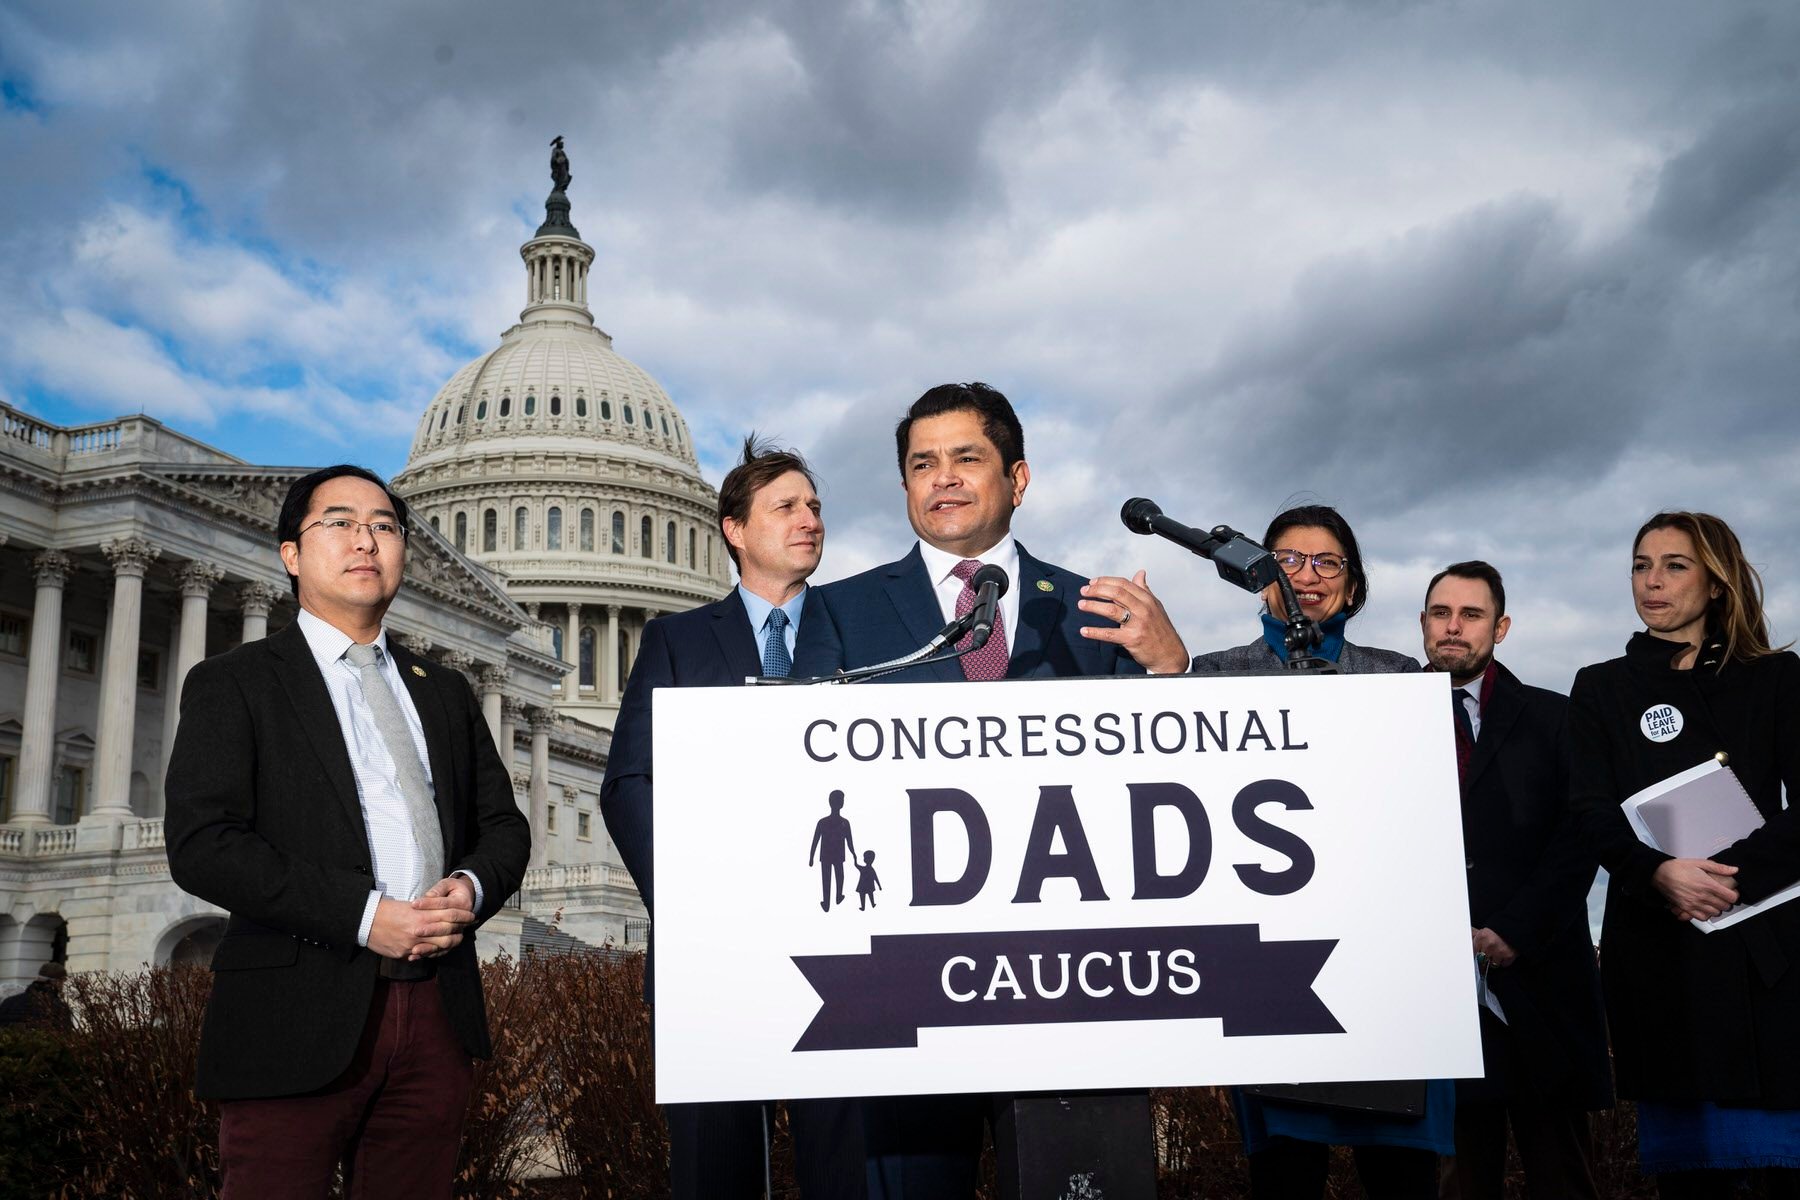 Rep. Jimmy Gomez and other members of Congress hold a news conference in front of the Capitol, with a sign that says "Congressional Dads Caucus"